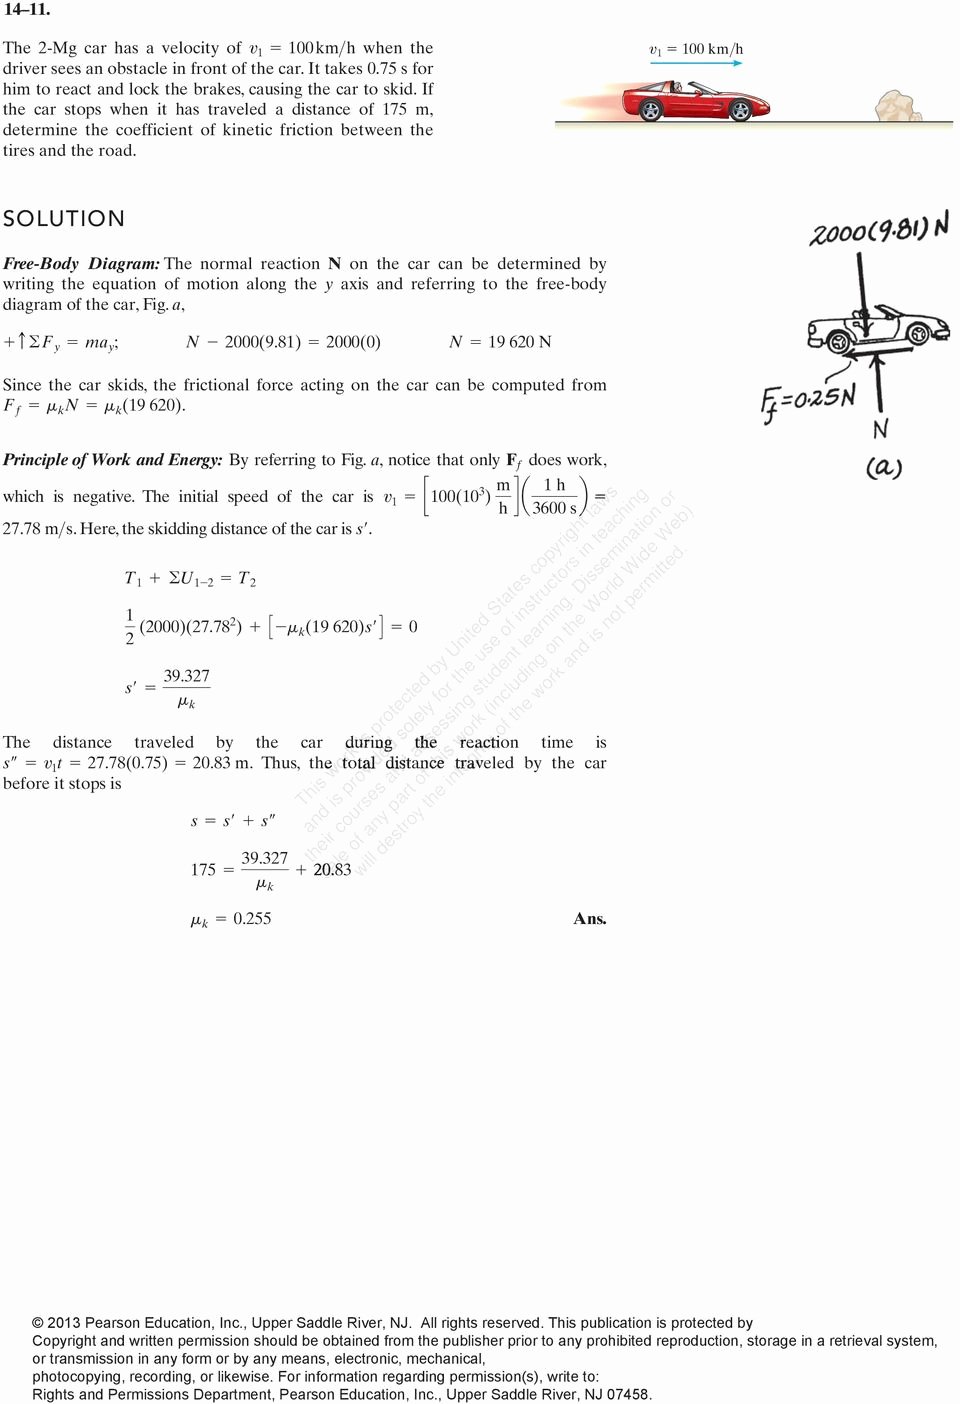 Coefficient Of Friction Worksheet Answers Fresh 39 Coefficient Friction Worksheet